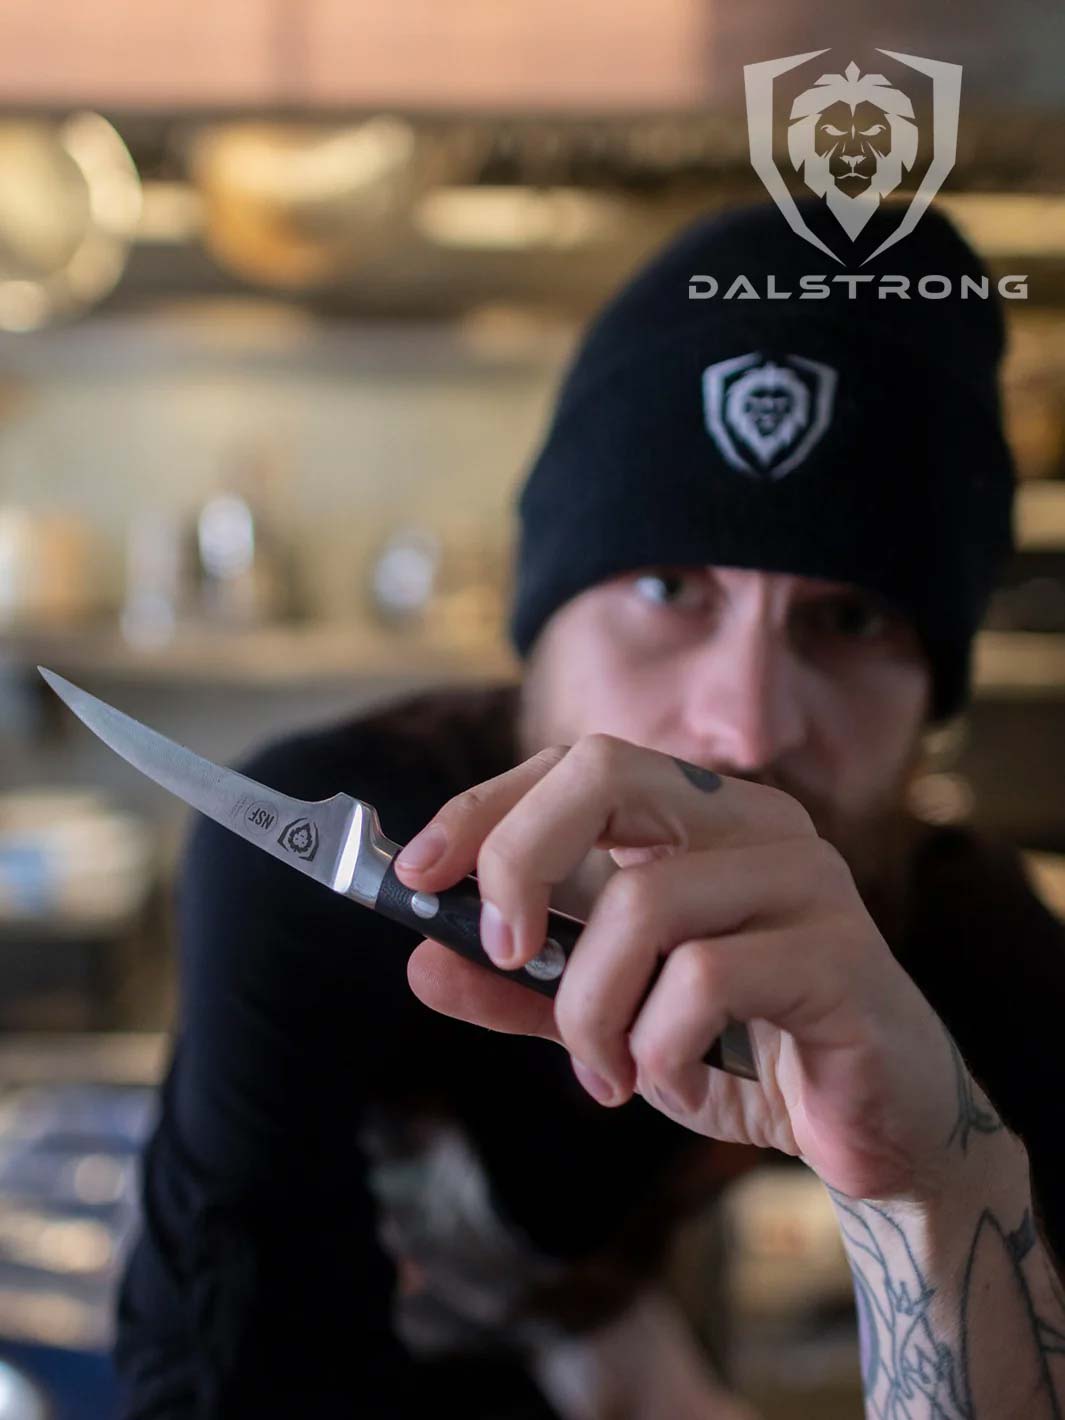 A man wearing a black hat holding the Dalstrong gladiator series 3 piece paring knife with black handle.